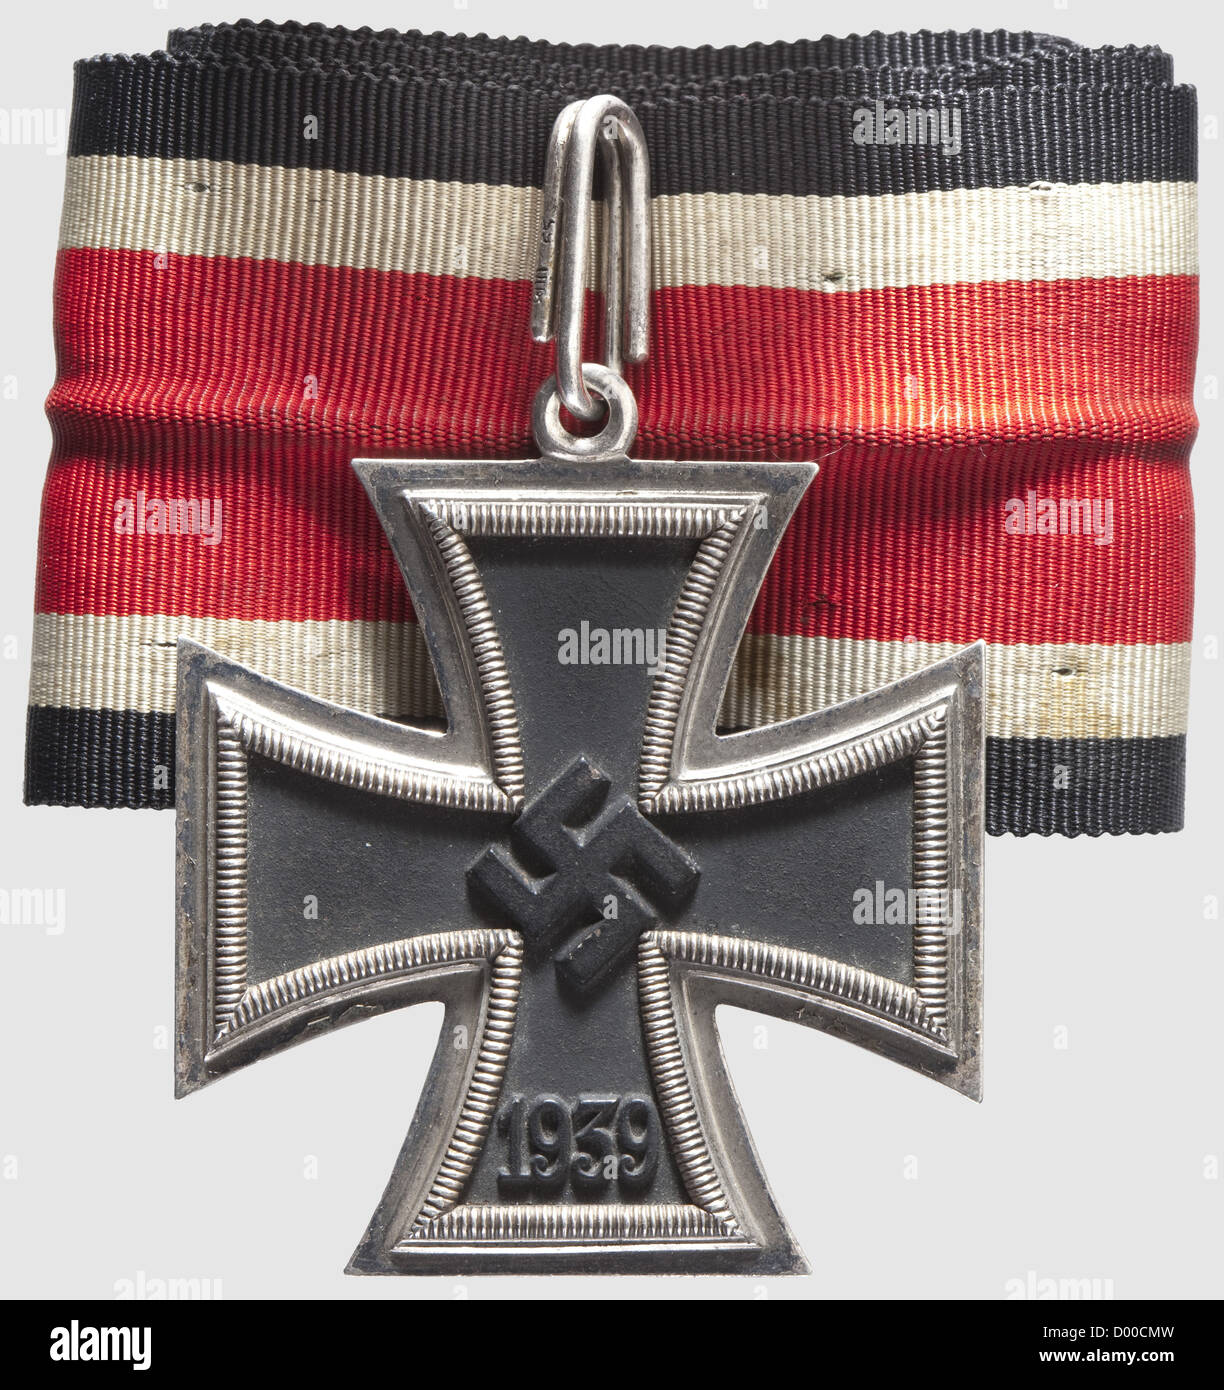 A Knight's Cross to the Iron Cross of 1939,Maker Klein & Quenzer,Idar-Oberstein. The silver frame stamped '800',the silver suspension ring '800' and '65'. Blackened iron core. Dimensions 49.1 x 48.6 mm,weight 31.92 g(Nie 7.03.08 c). Included is a 72 cm length of non-customised neck ribbon(stained),historic,historical,1930s,20th century,awards,award,German Reich,Third Reich,Nazi era,National Socialism,object,objects,stills,medal,decoration,medals,decorations,clipping,cut out,cut-out,cut-outs,honor,honour,National Socialist,Nazi,Na,Additional-Rights-Clearences-Not Available Stock Photo